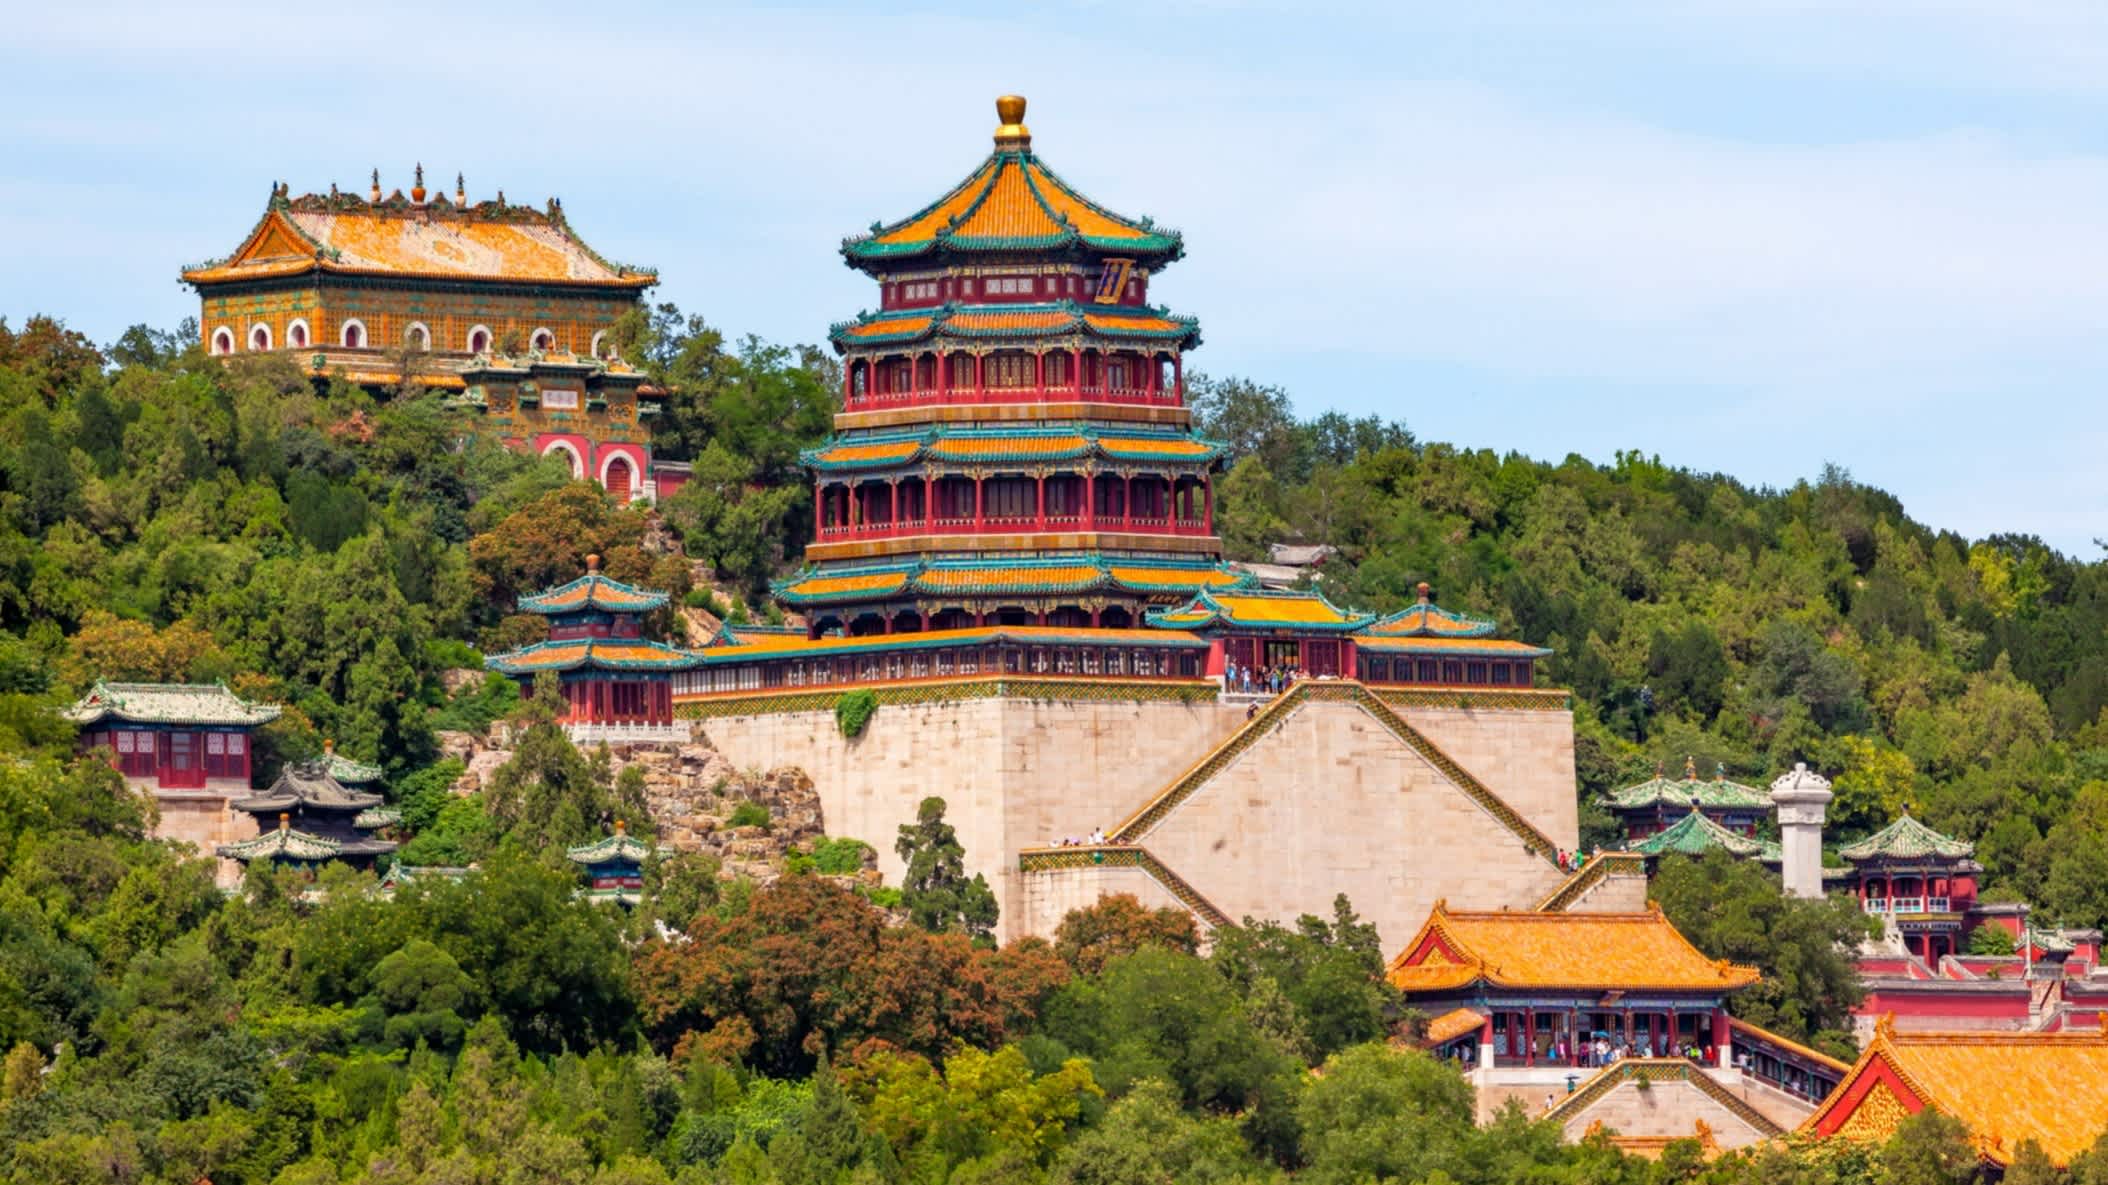 View of the colorful waterfront Summer Palace in Beijing, China